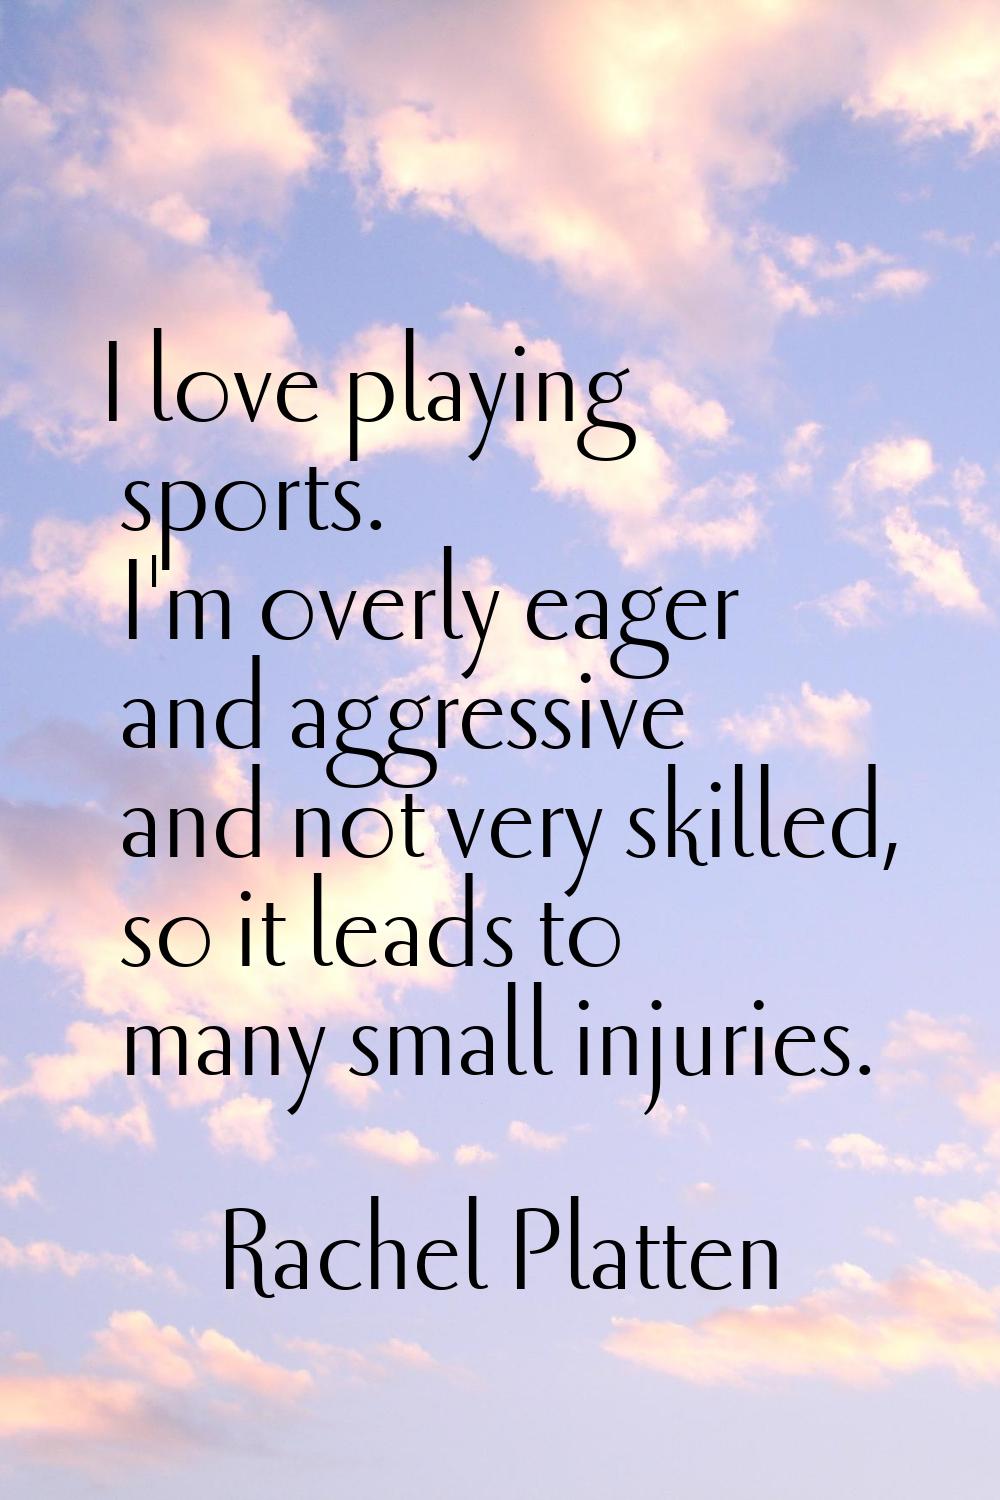 I love playing sports. I'm overly eager and aggressive and not very skilled, so it leads to many sm